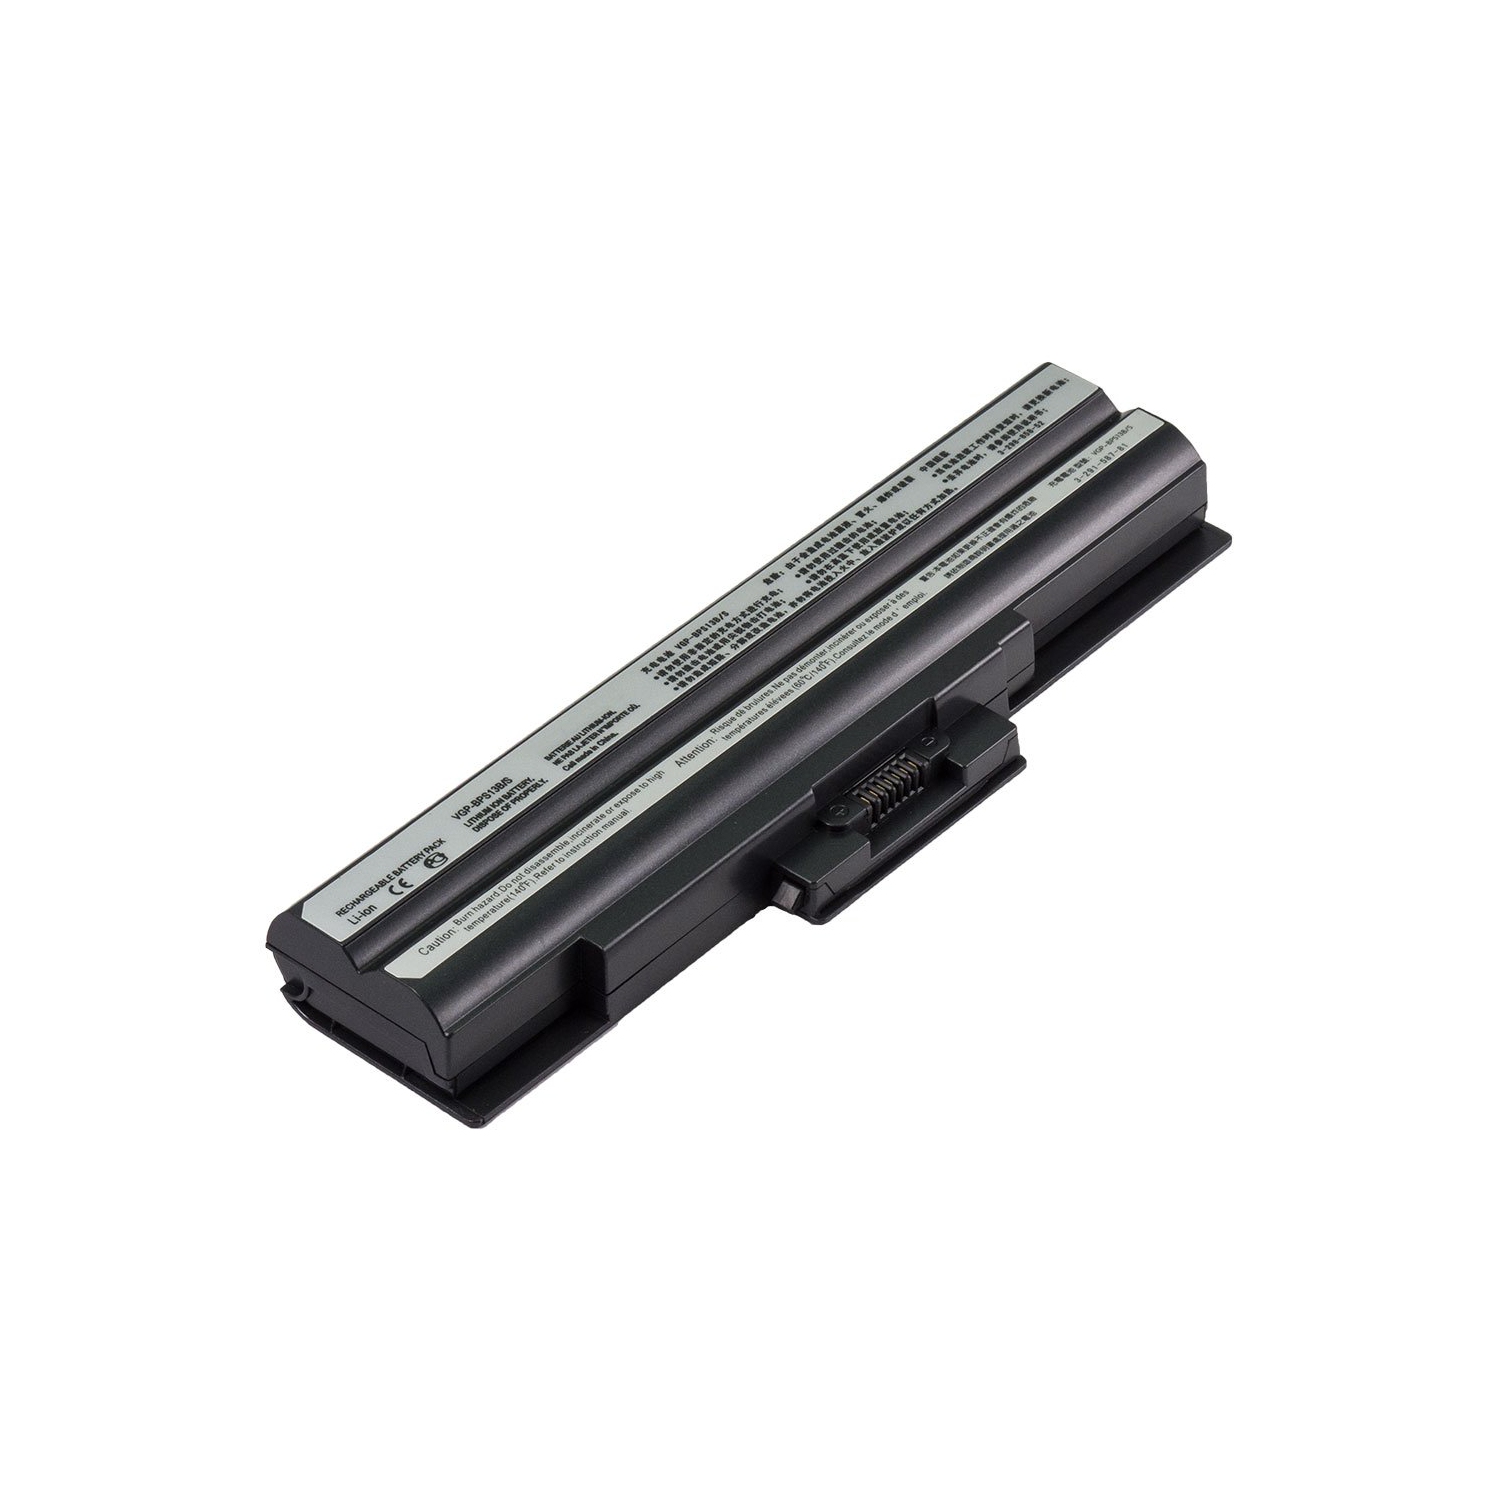 Laptop Battery Replacement for Sony VAIO VGN-CS180J/P, VGP-BPS13, VGP-BPS13/S, VGP-BPS13A/Q, VGP-BPS13B/B, VGP-BSP13/S